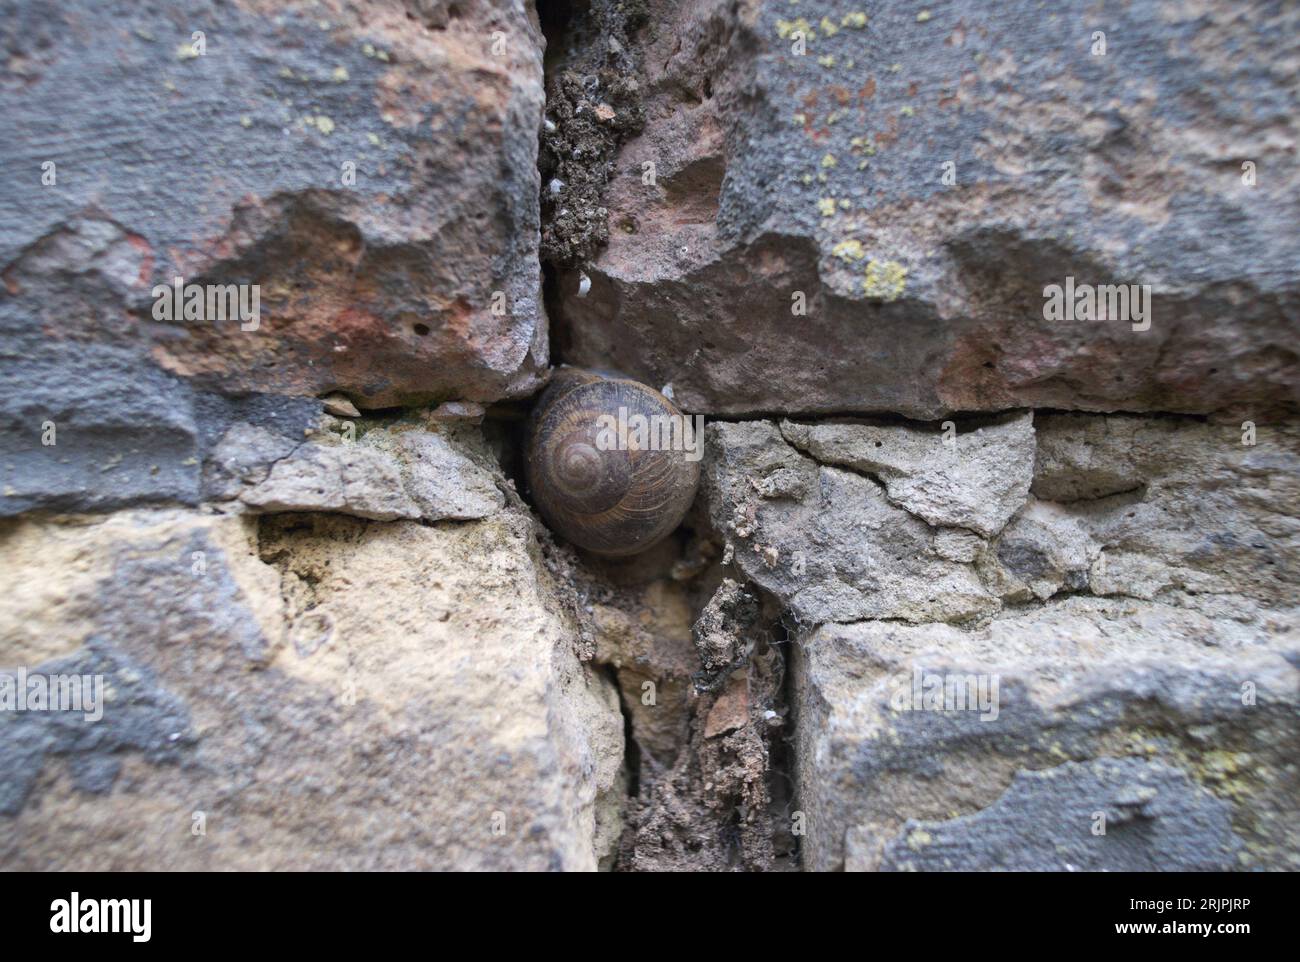 A close-up shot of a snail crawling on a stone wall with cracks and fissures in the surface Stock Photo